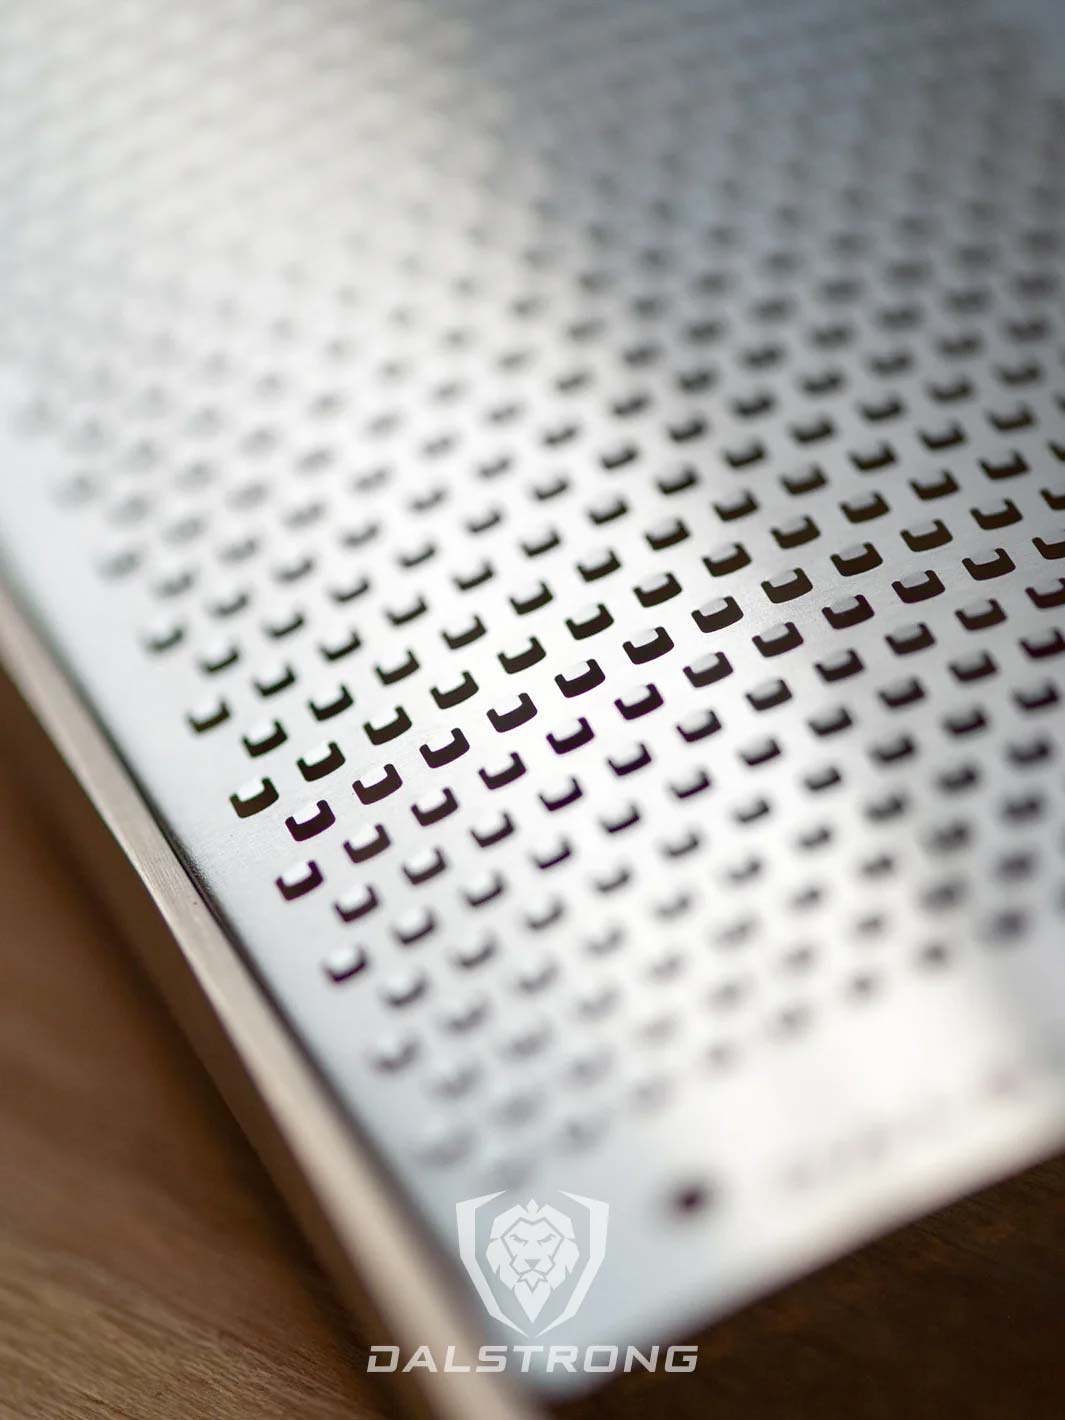 Dalstrong professional fine wide cheese grater showcasing it's stainless steel grater.